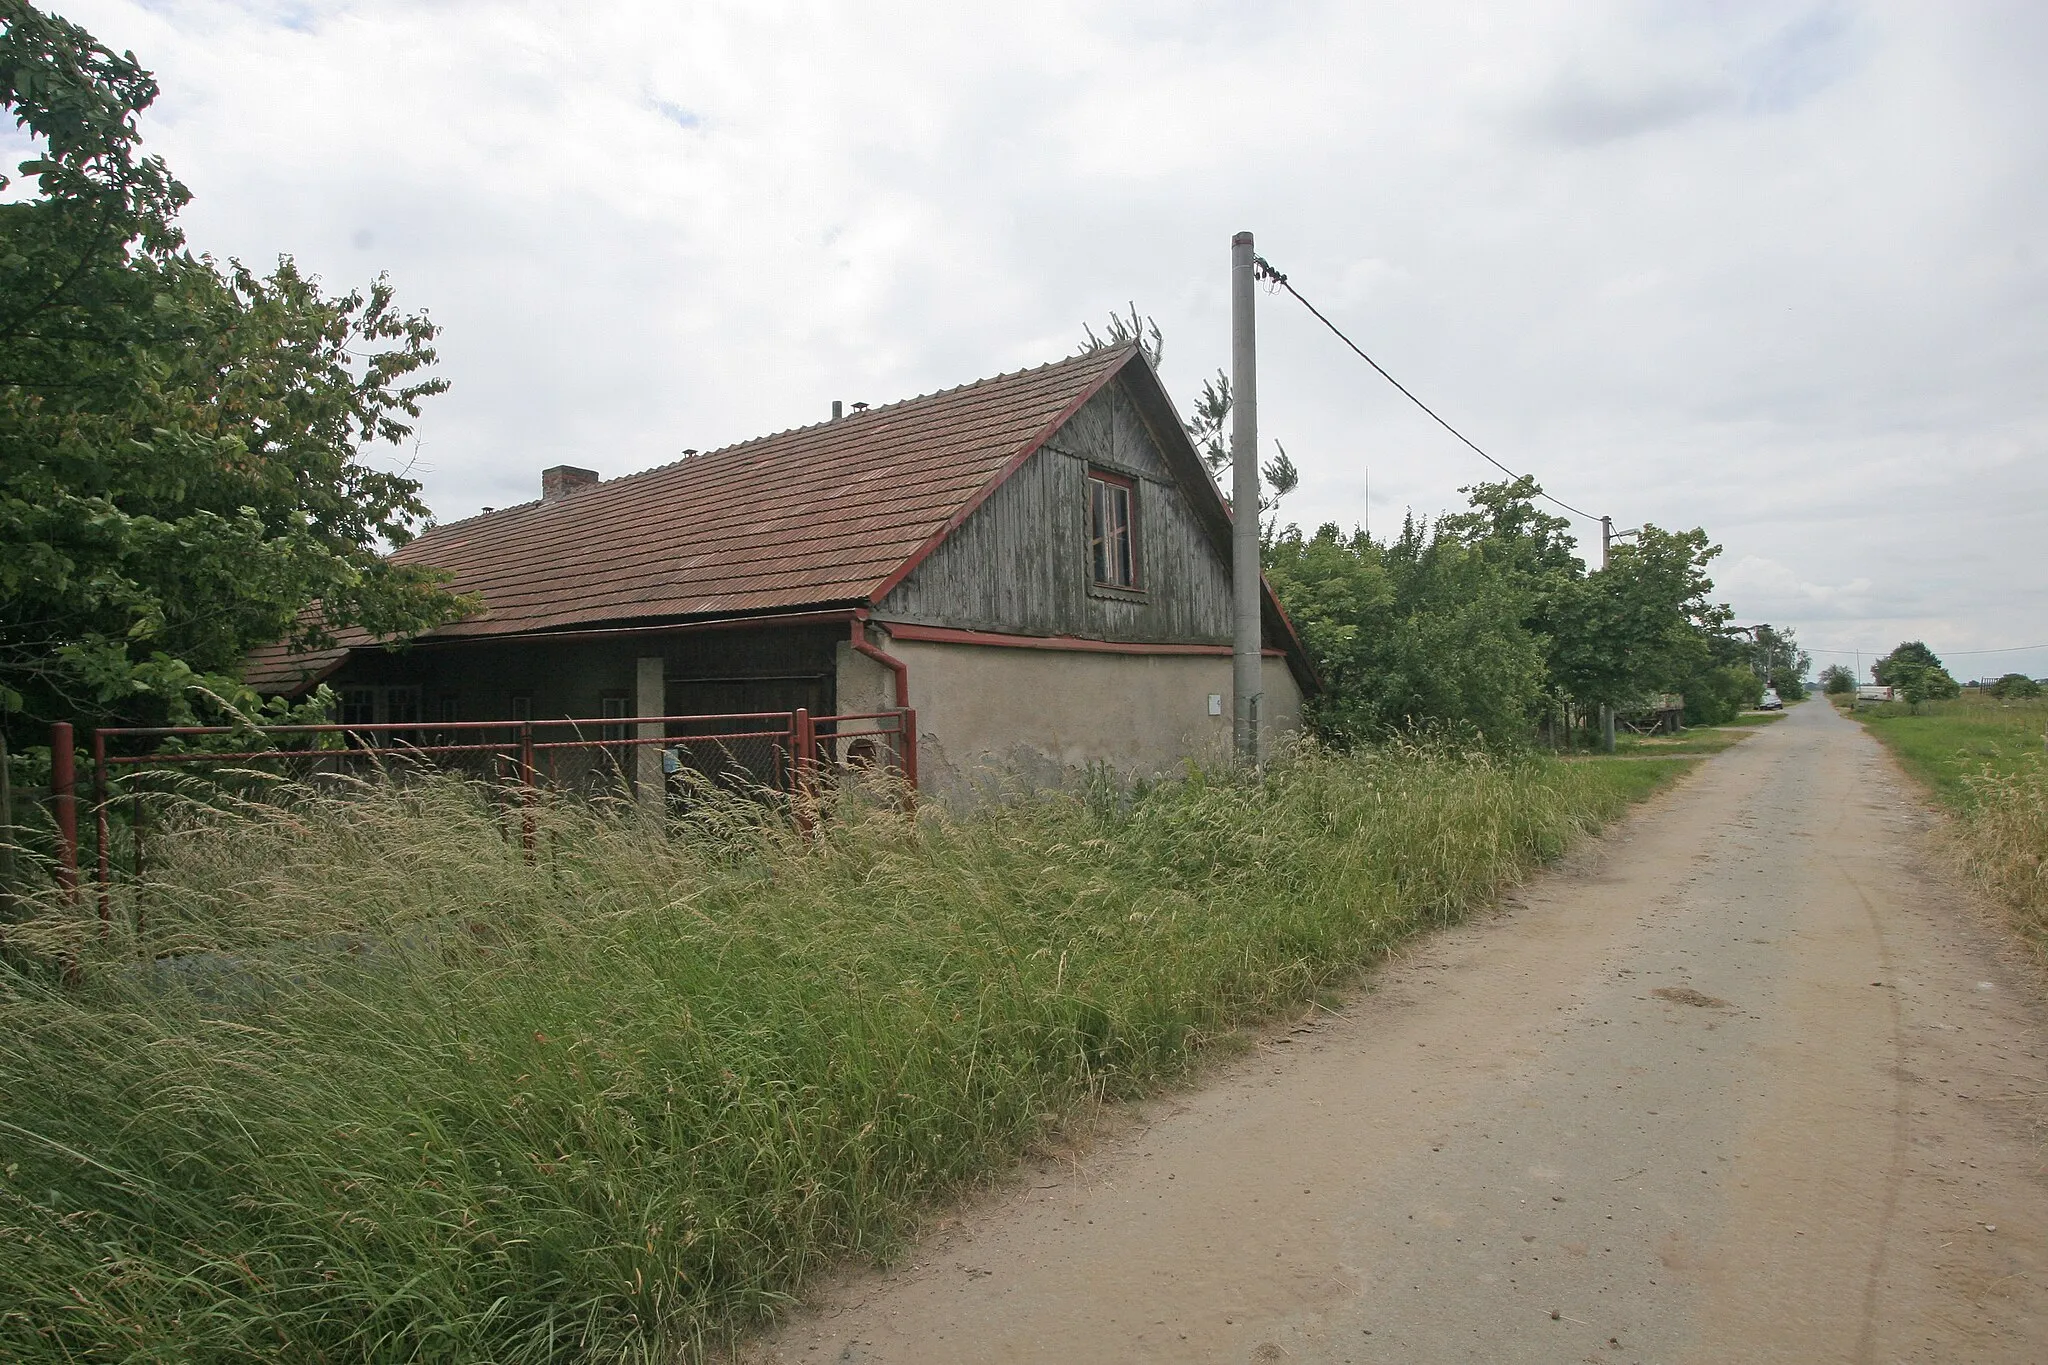 Photo showing: Drahoš čp. 13
Camera location 50° 05′ 41.65″ N, 15° 55′ 00.31″ E View this and other nearby images on: OpenStreetMap 50.094902;   15.916754

This file was created as a part of the photographic program of Wikimedia Czech Republic. Project: Foto českých obcí The program supports Wikimedia Commons photographers in the Czech Republic.